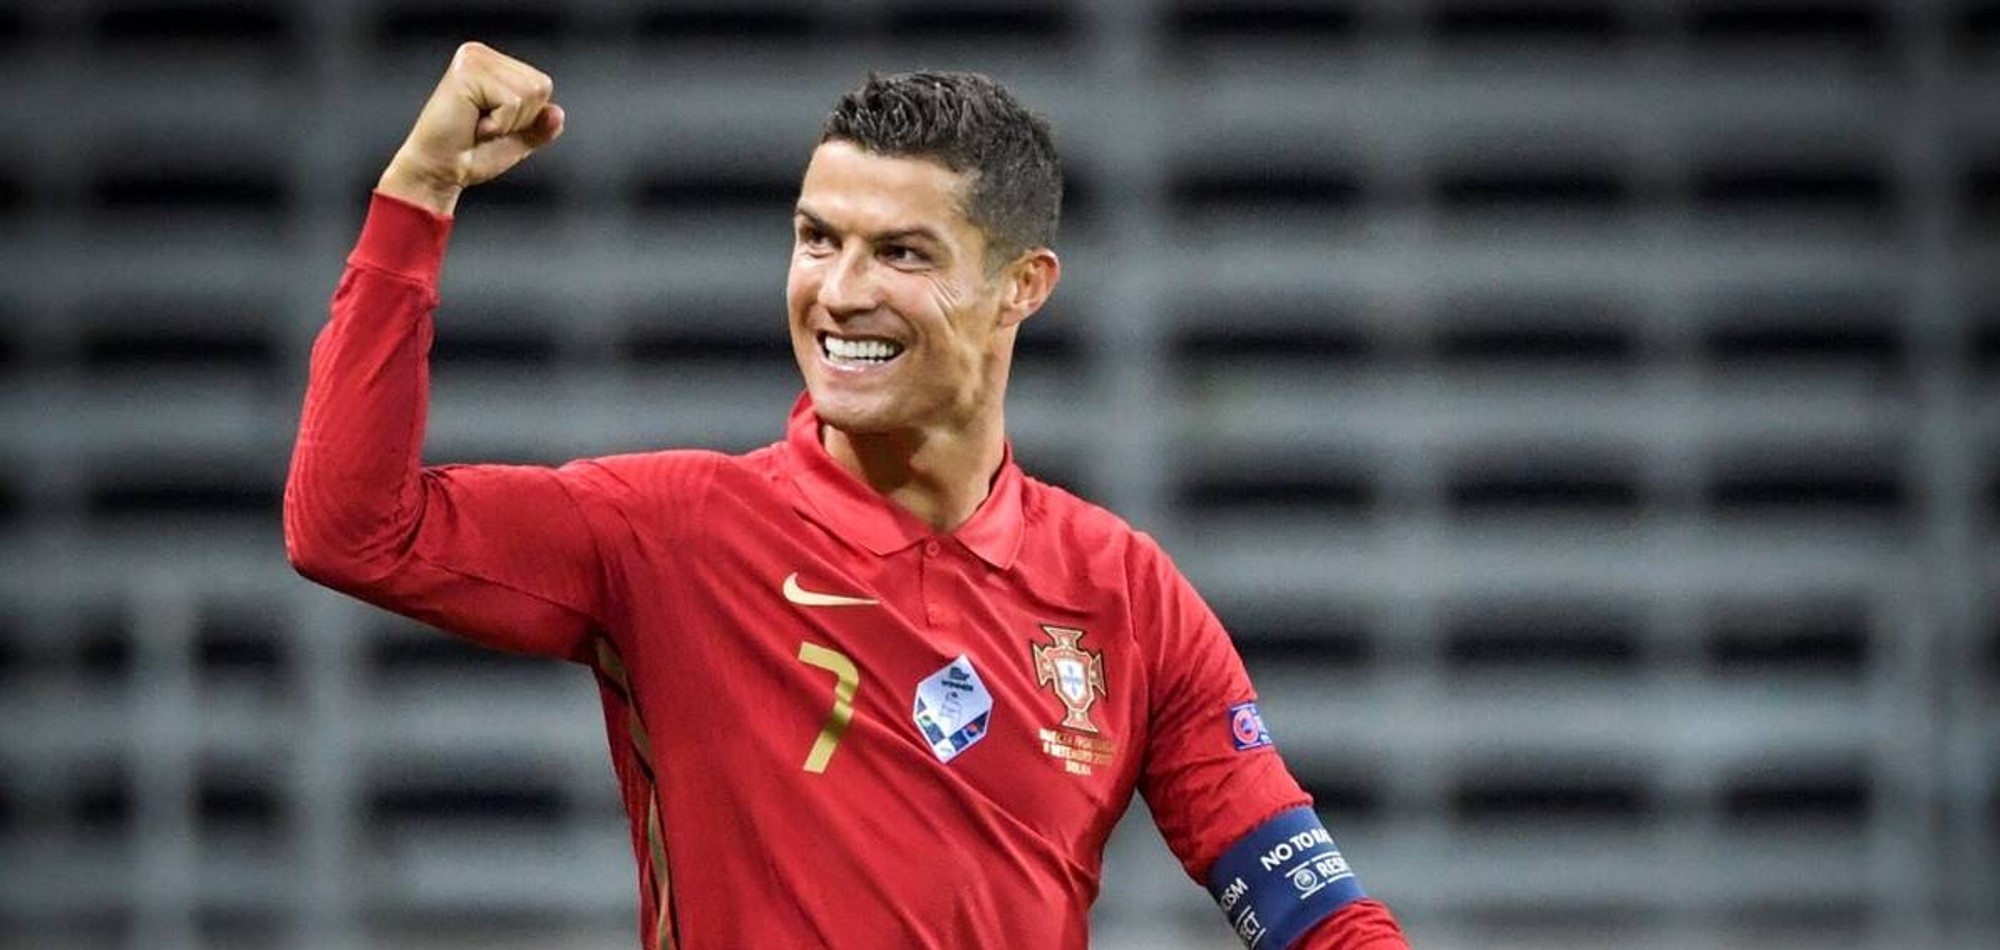 Cristiano Ronaldo named most powerful player on Instagram at 2022 World Cup